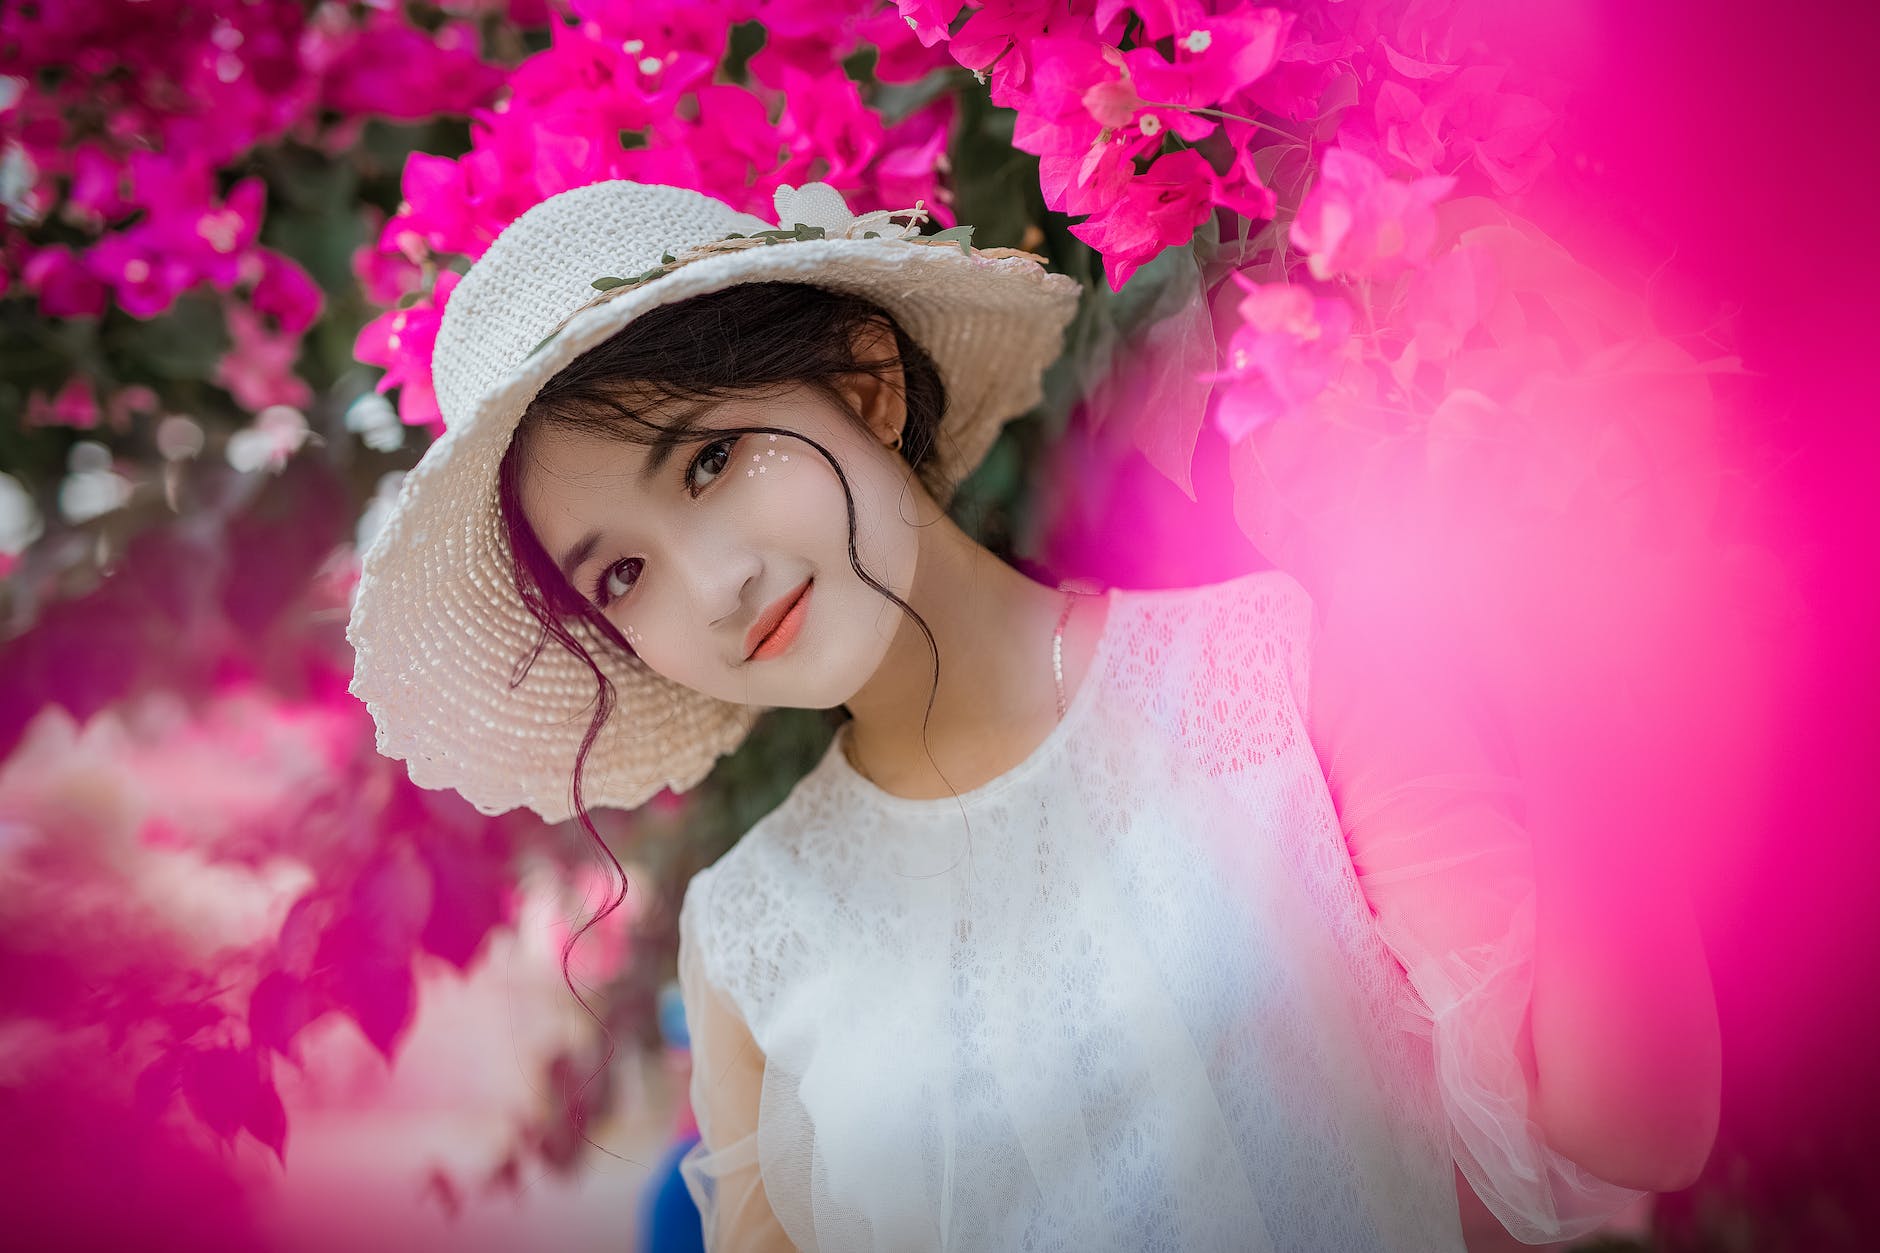 woman surrounded by pink bougainvillea flowers